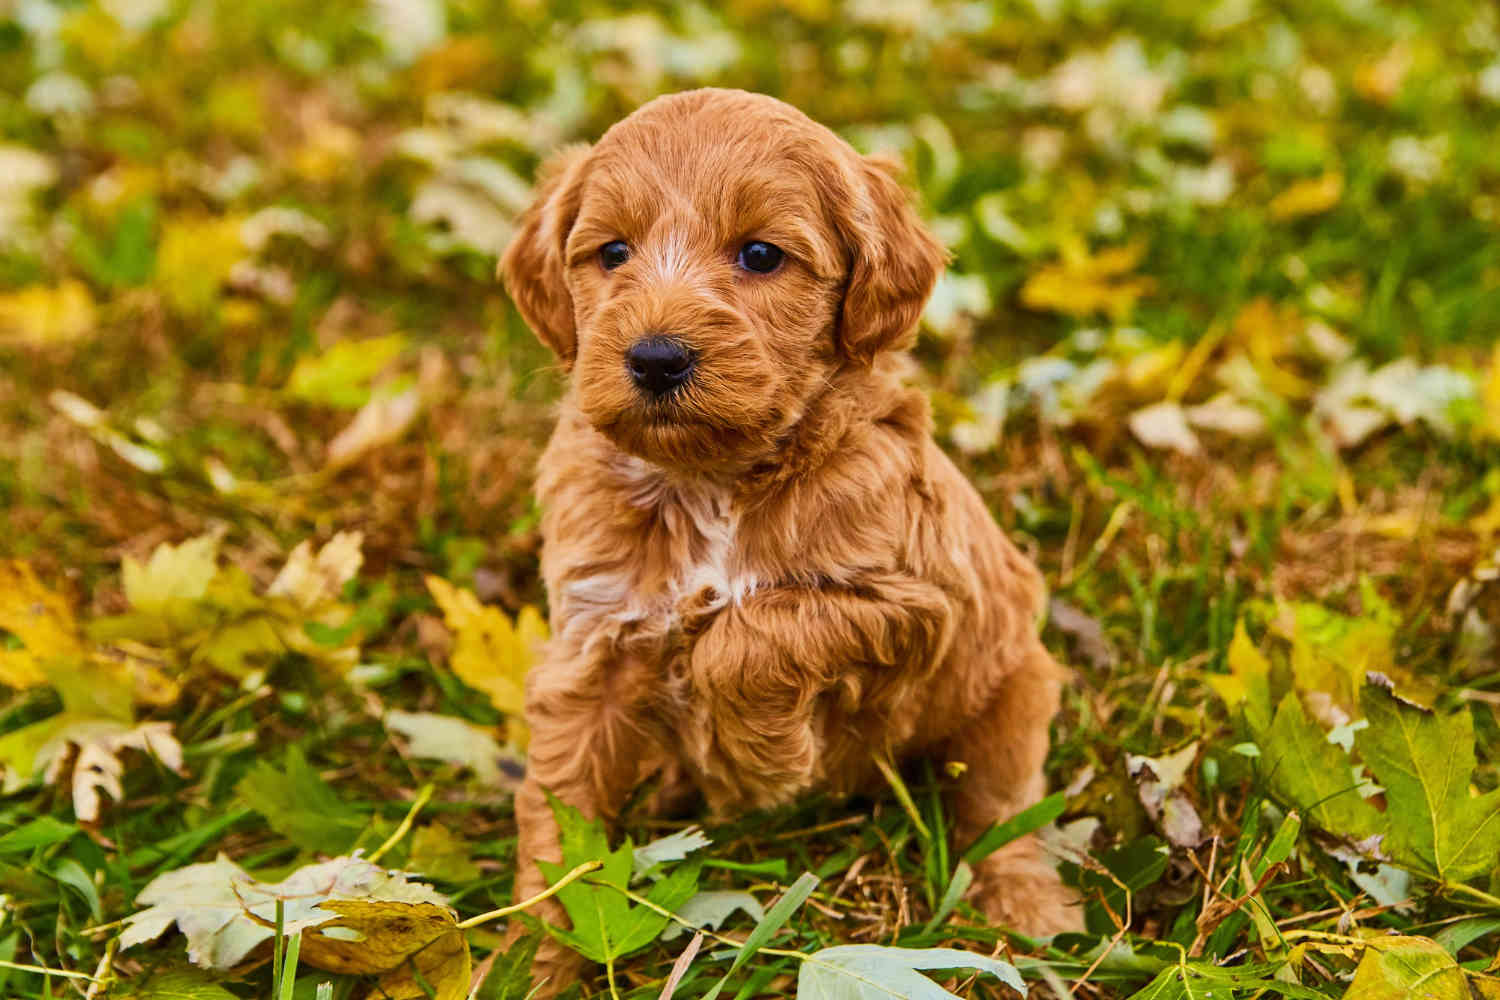 Goldendoodle Puppy Socialization: Tips and Tricks for a Happy, Well-Adjusted Companion